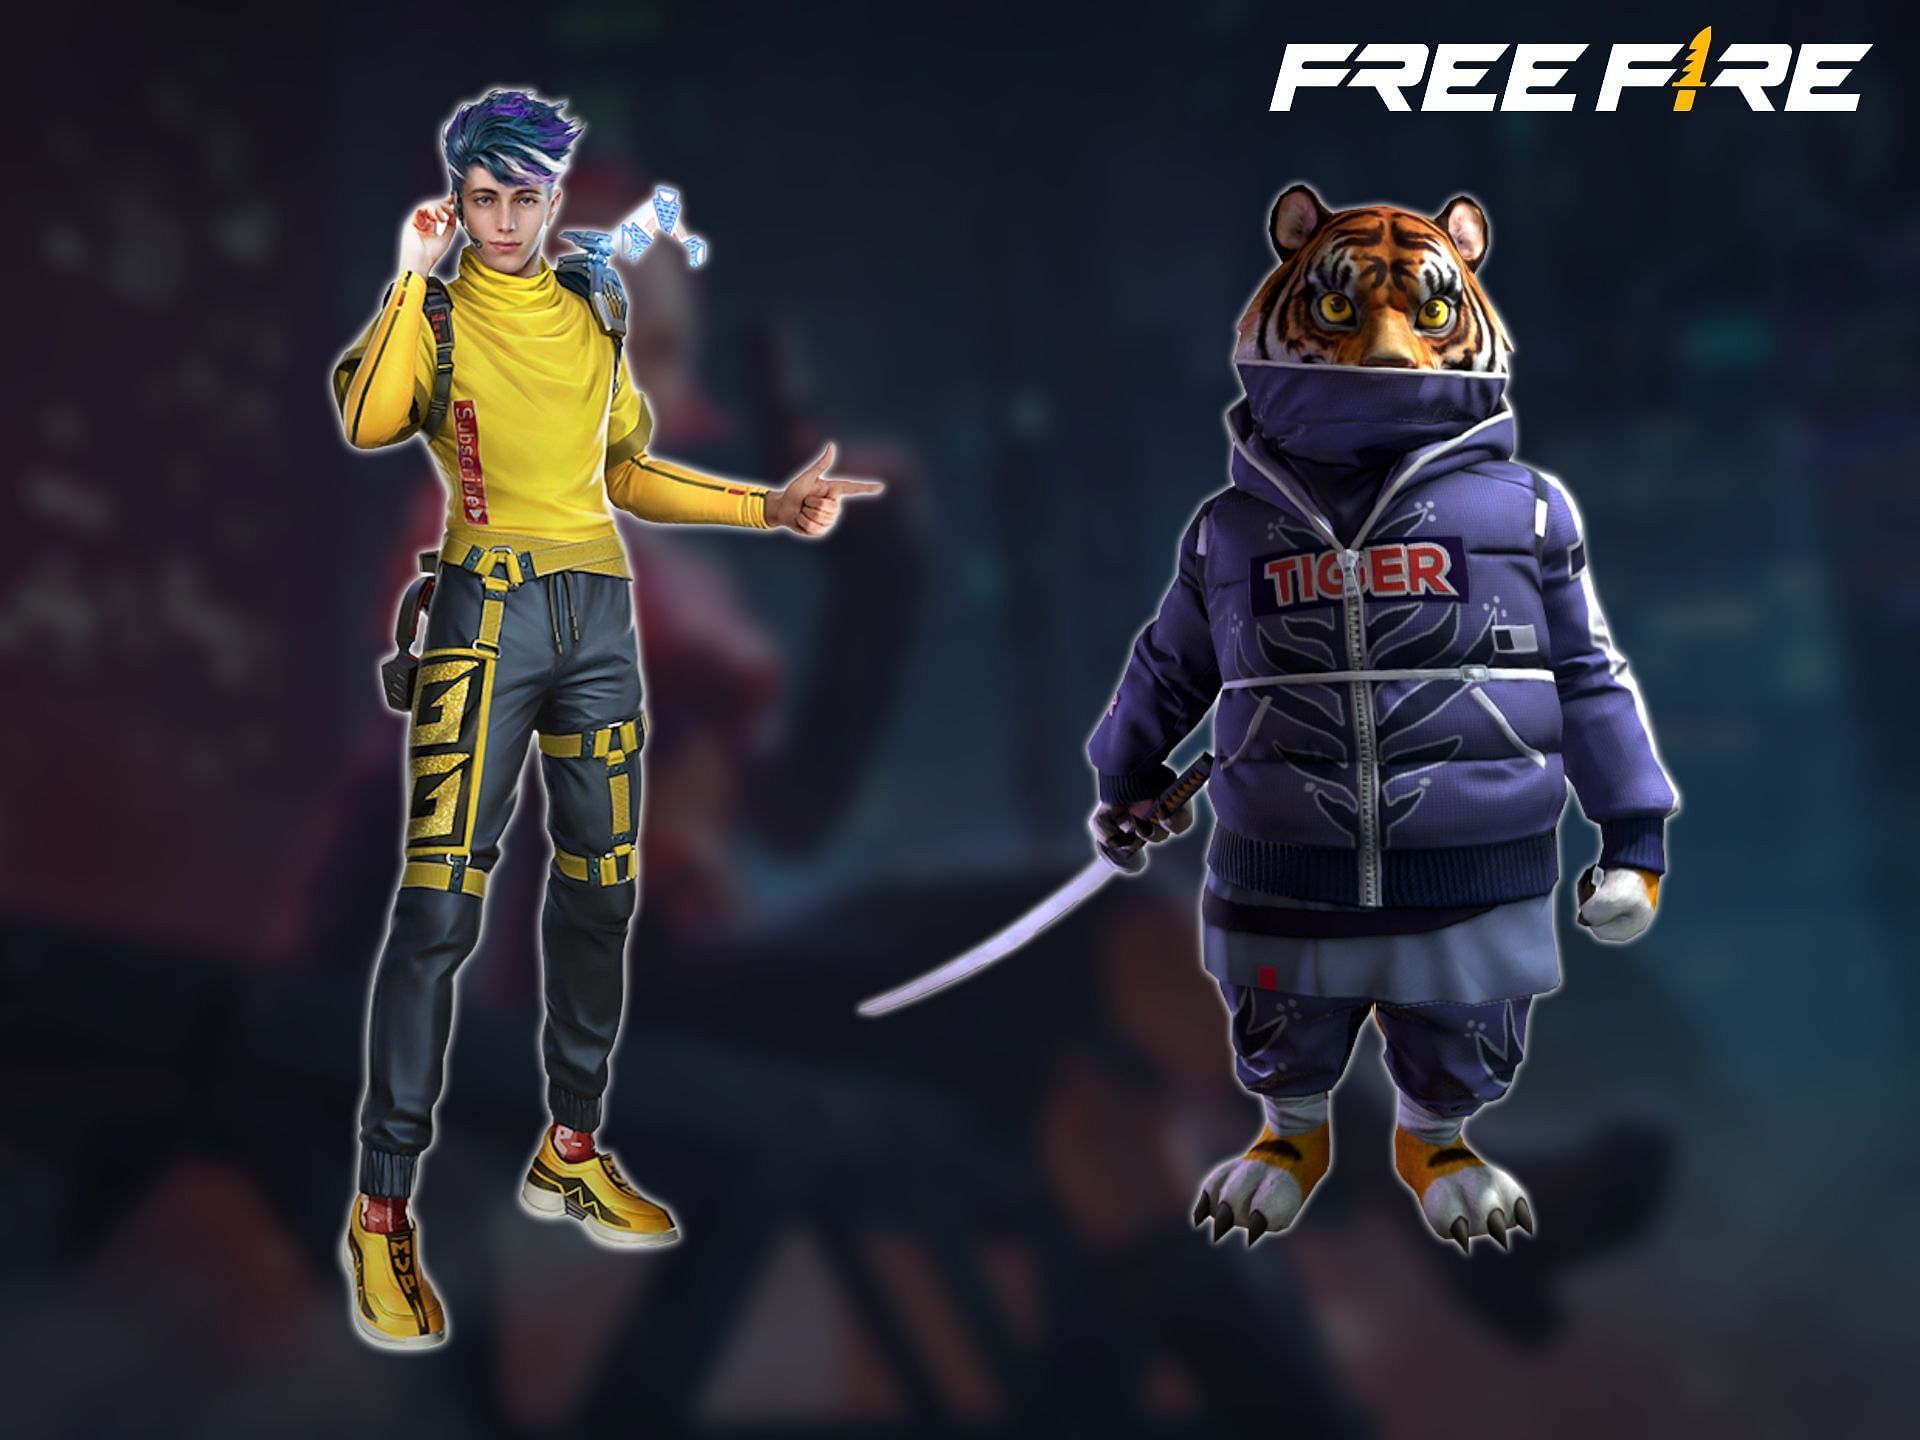 Free Fire redeem codes provide free characters and pets among other rewards (Image via Sportskeeda)